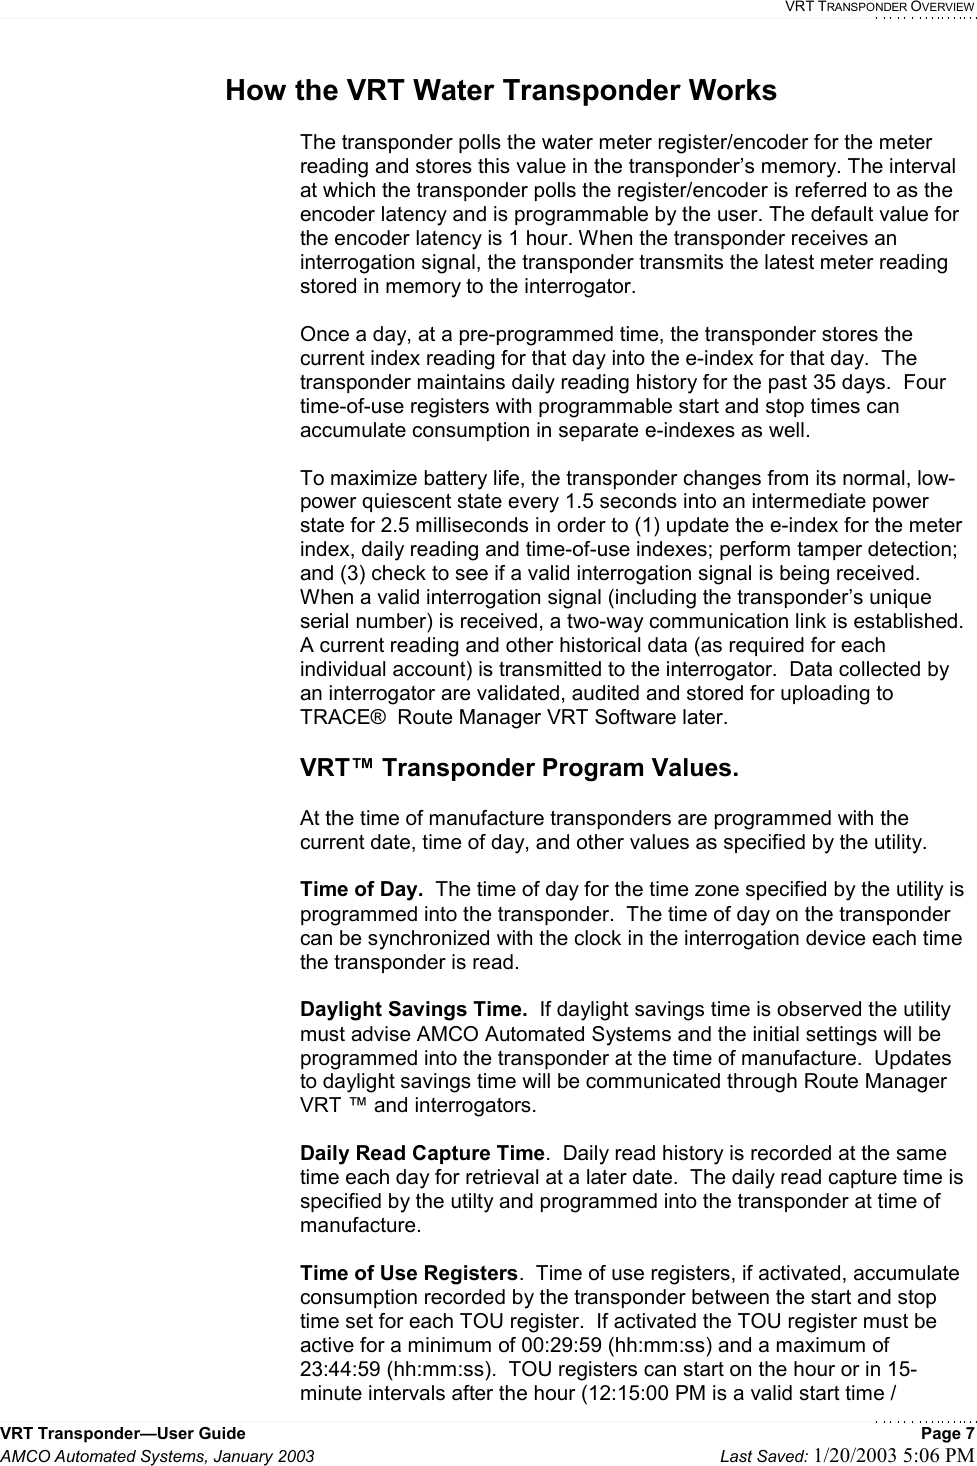   VRT TRANSPONDER OVERVIEW VRT Transponder—User Guide    Page 7 AMCO Automated Systems, January 2003    Last Saved: 1/20/2003 5:06 PM  How the VRT Water Transponder Works  The transponder polls the water meter register/encoder for the meter reading and stores this value in the transponder’s memory. The interval at which the transponder polls the register/encoder is referred to as the encoder latency and is programmable by the user. The default value for the encoder latency is 1 hour. When the transponder receives an interrogation signal, the transponder transmits the latest meter reading stored in memory to the interrogator.  Once a day, at a pre-programmed time, the transponder stores the current index reading for that day into the e-index for that day.  The transponder maintains daily reading history for the past 35 days.  Four time-of-use registers with programmable start and stop times can accumulate consumption in separate e-indexes as well.  To maximize battery life, the transponder changes from its normal, low-power quiescent state every 1.5 seconds into an intermediate power state for 2.5 milliseconds in order to (1) update the e-index for the meter index, daily reading and time-of-use indexes; perform tamper detection; and (3) check to see if a valid interrogation signal is being received.  When a valid interrogation signal (including the transponder’s unique serial number) is received, a two-way communication link is established.  A current reading and other historical data (as required for each individual account) is transmitted to the interrogator.  Data collected by an interrogator are validated, audited and stored for uploading to TRACE®  Route Manager VRT Software later.   VRT™ Transponder Program Values.  At the time of manufacture transponders are programmed with the current date, time of day, and other values as specified by the utility.    Time of Day.  The time of day for the time zone specified by the utility is programmed into the transponder.  The time of day on the transponder can be synchronized with the clock in the interrogation device each time the transponder is read.  Daylight Savings Time.  If daylight savings time is observed the utility must advise AMCO Automated Systems and the initial settings will be programmed into the transponder at the time of manufacture.  Updates to daylight savings time will be communicated through Route Manager VRT ™ and interrogators.  Daily Read Capture Time.  Daily read history is recorded at the same time each day for retrieval at a later date.  The daily read capture time is specified by the utilty and programmed into the transponder at time of manufacture.  Time of Use Registers.  Time of use registers, if activated, accumulate consumption recorded by the transponder between the start and stop time set for each TOU register.  If activated the TOU register must be active for a minimum of 00:29:59 (hh:mm:ss) and a maximum of 23:44:59 (hh:mm:ss).  TOU registers can start on the hour or in 15-minute intervals after the hour (12:15:00 PM is a valid start time / 